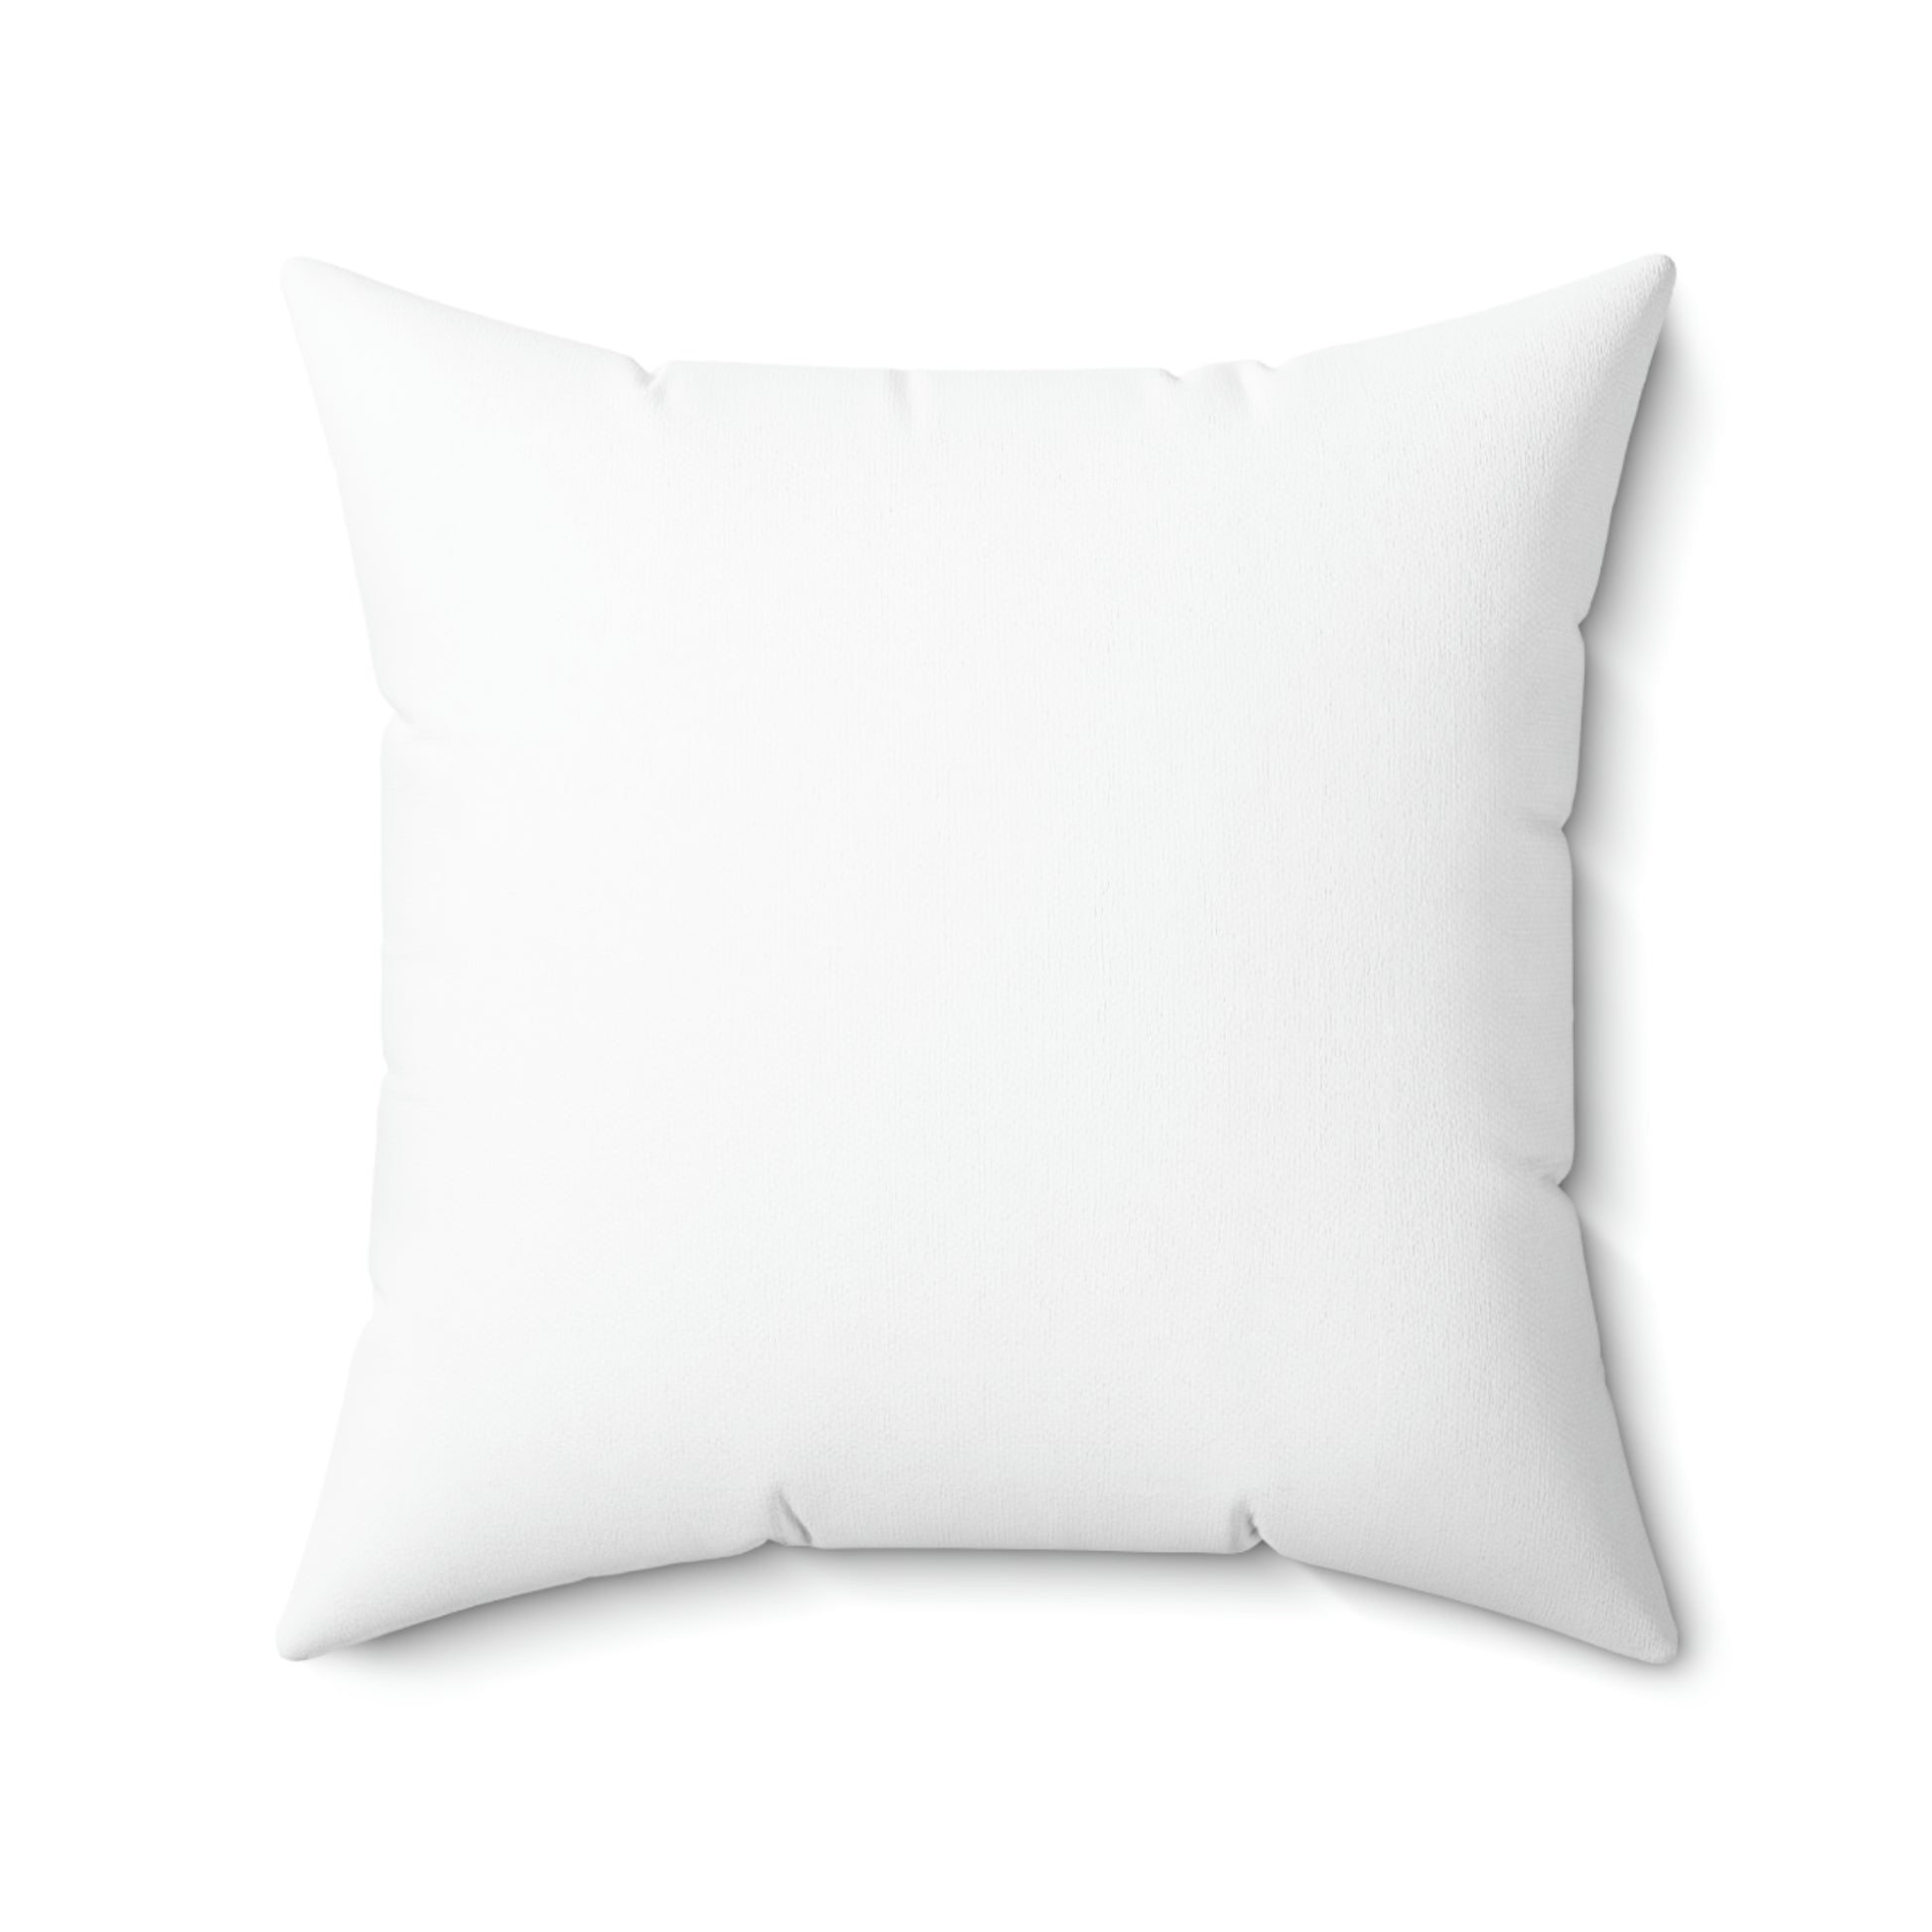 "It's The Most Wonderful Time Of The Year" Throw Pillow - Weave Got Gifts - Unique Gifts You Won’t Find Anywhere Else!